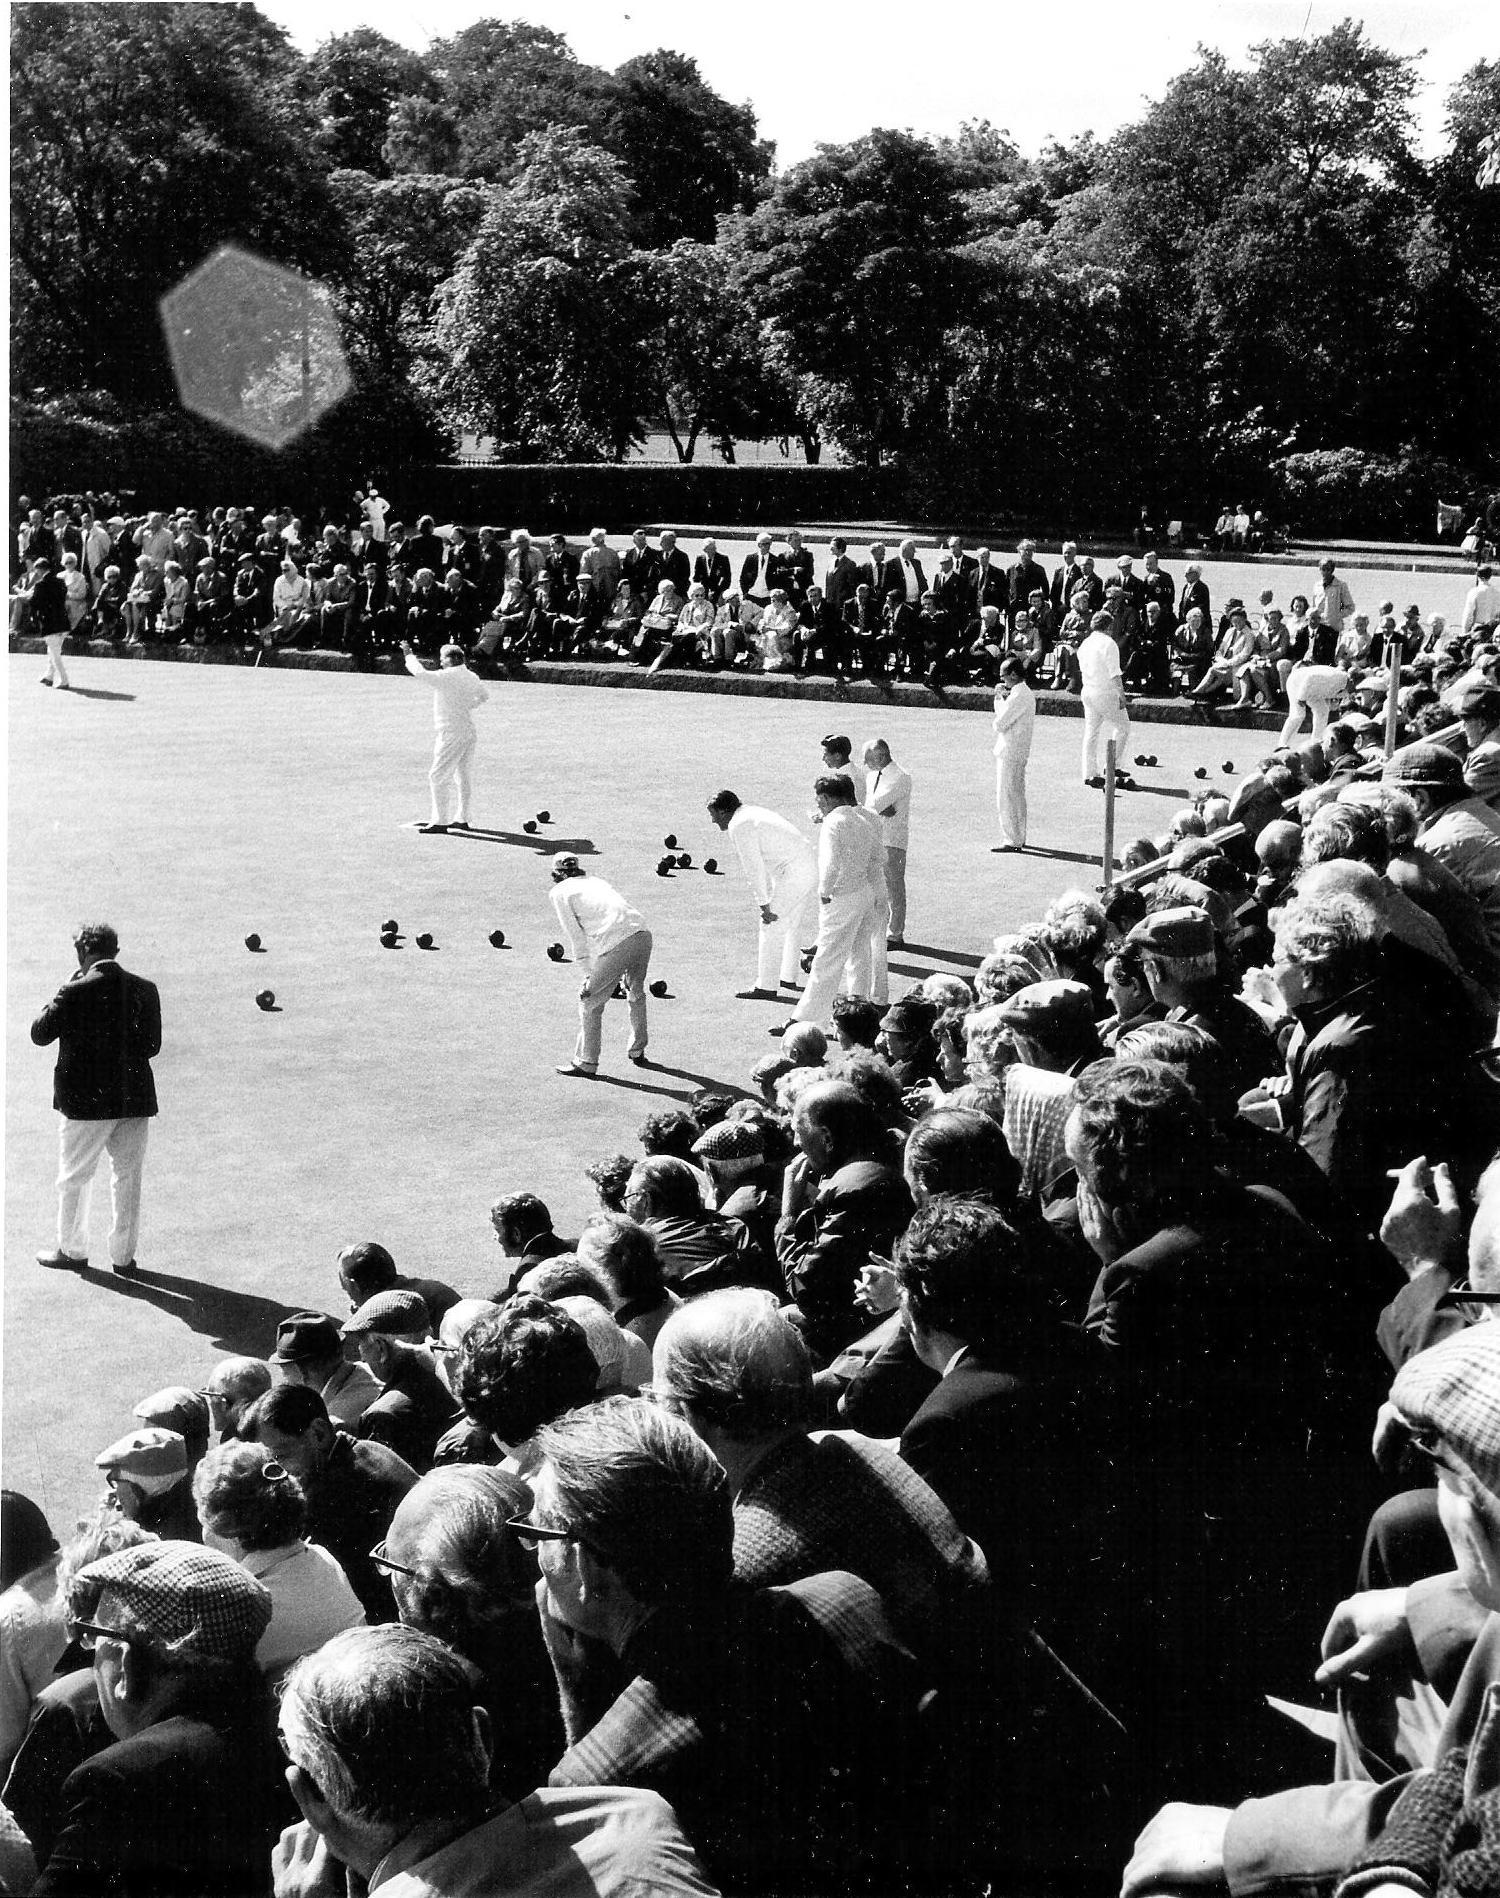 Queens Park Bowling Club in 1974